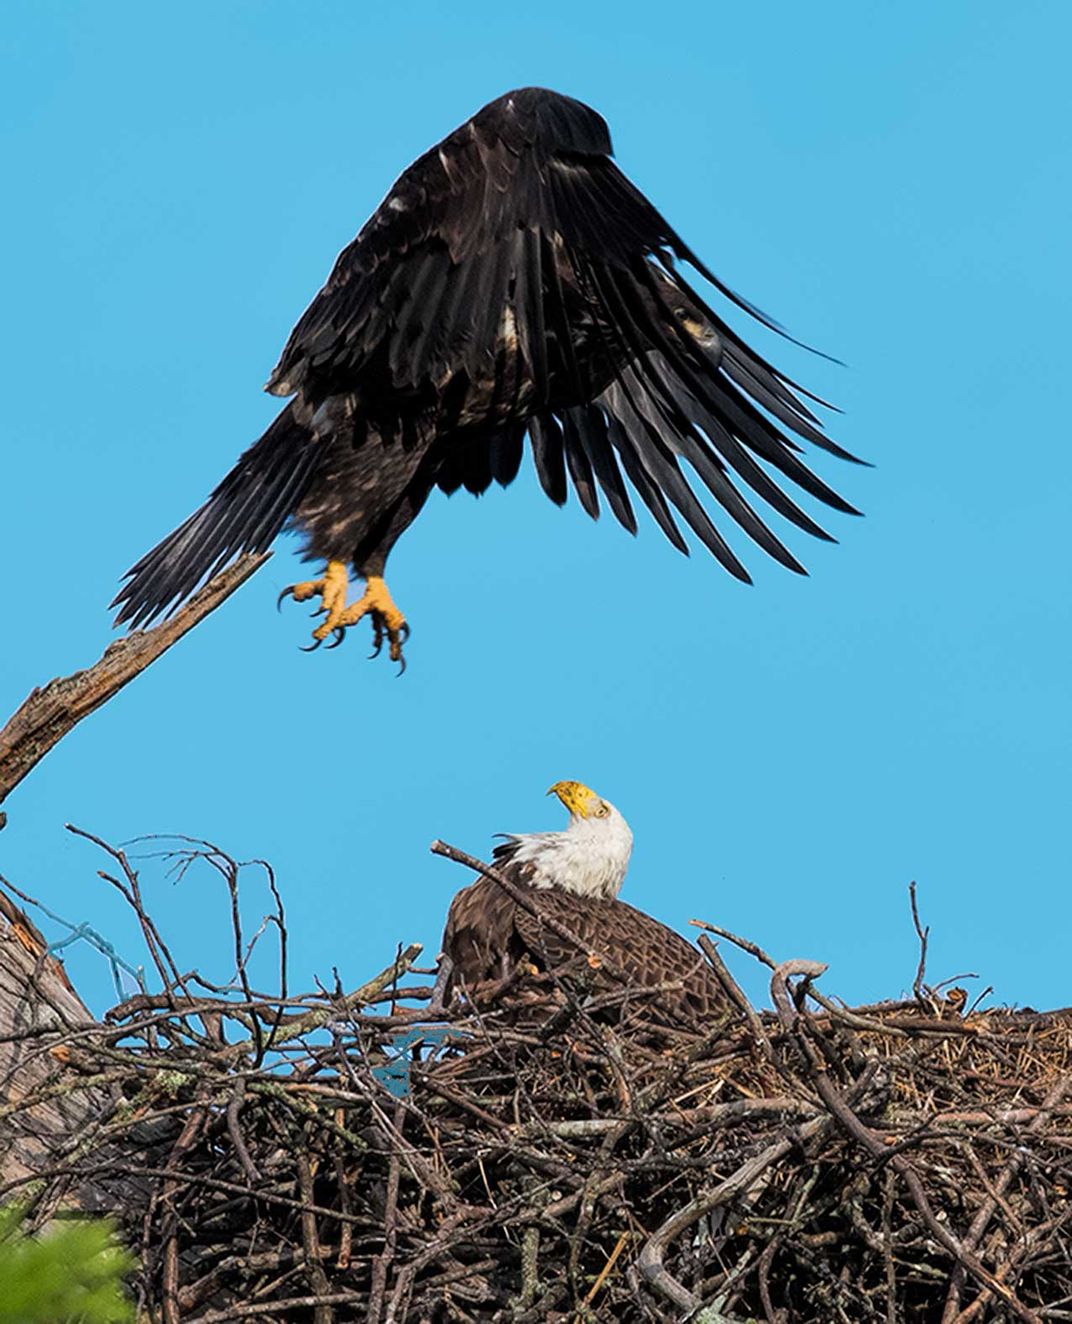 Young Bald Eagle Jumping over Parent | Smithsonian Photo Contest ...